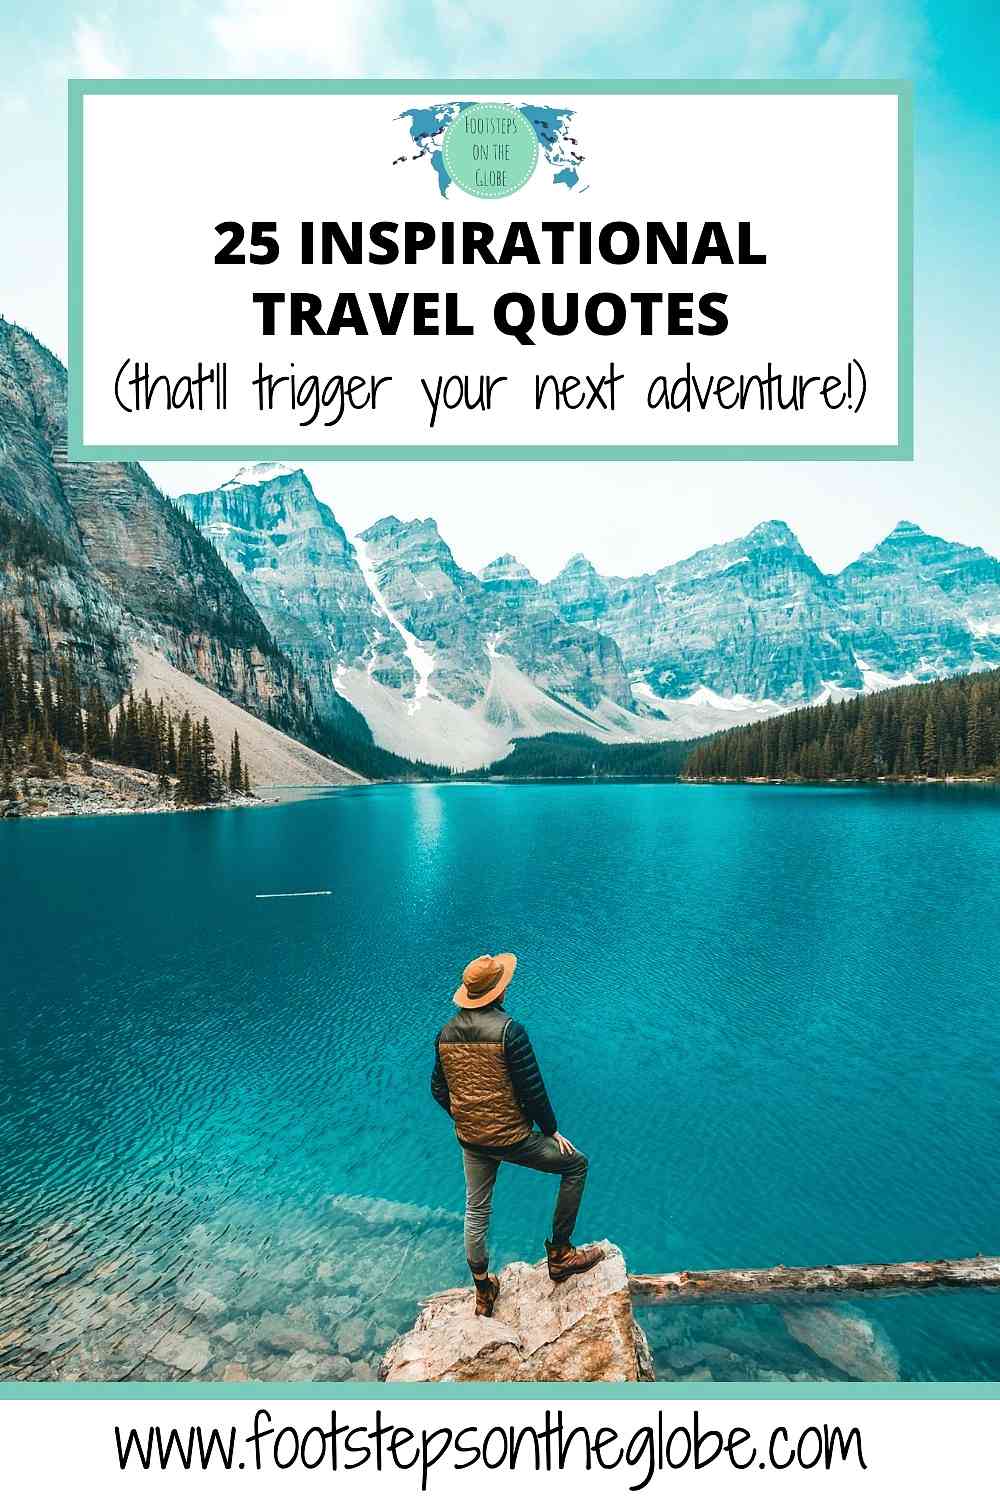 Pinterest image: Man standing in front of a blue lake with snowy mountains in the background with the text: "25 Inspirational travel quotes, that'll trigger your next adventure!"